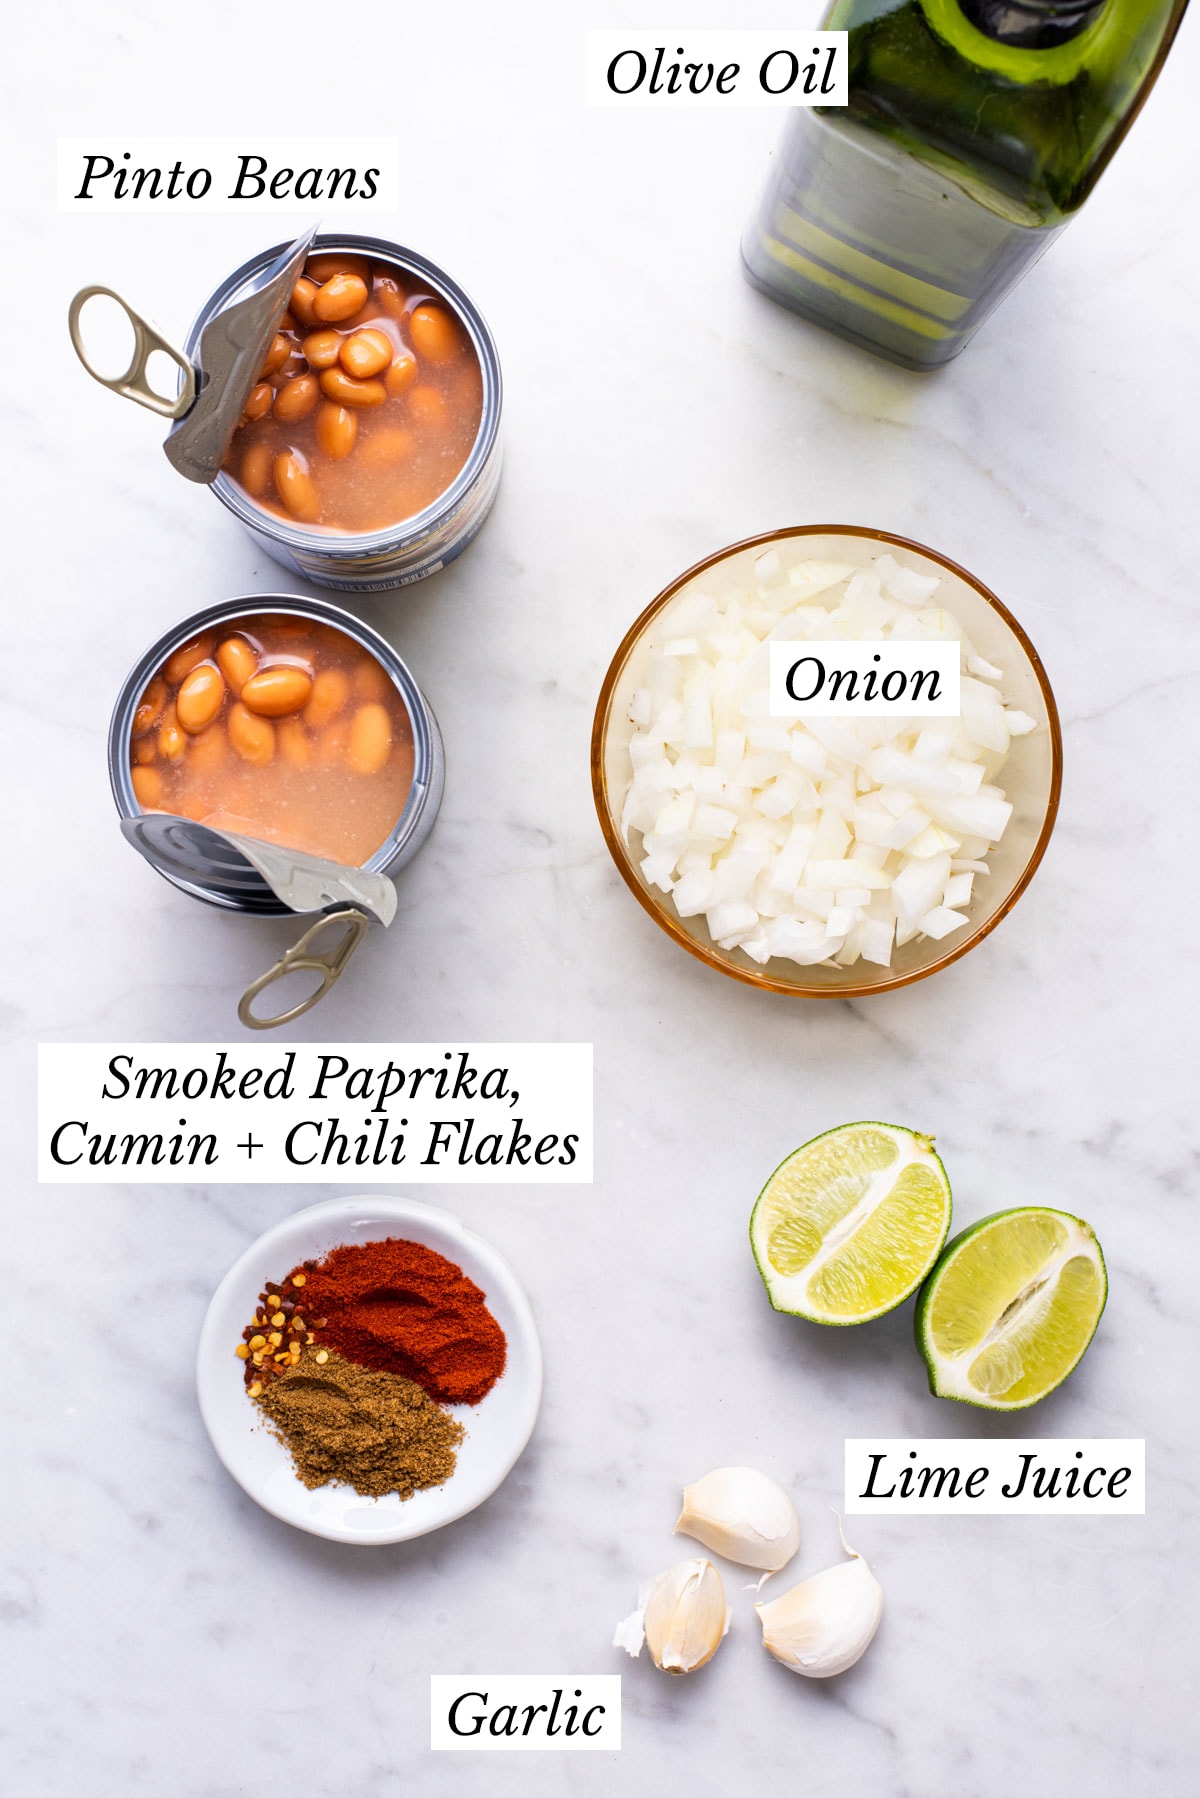 Ingredients gathered to make vegan refried beans with canned beans.